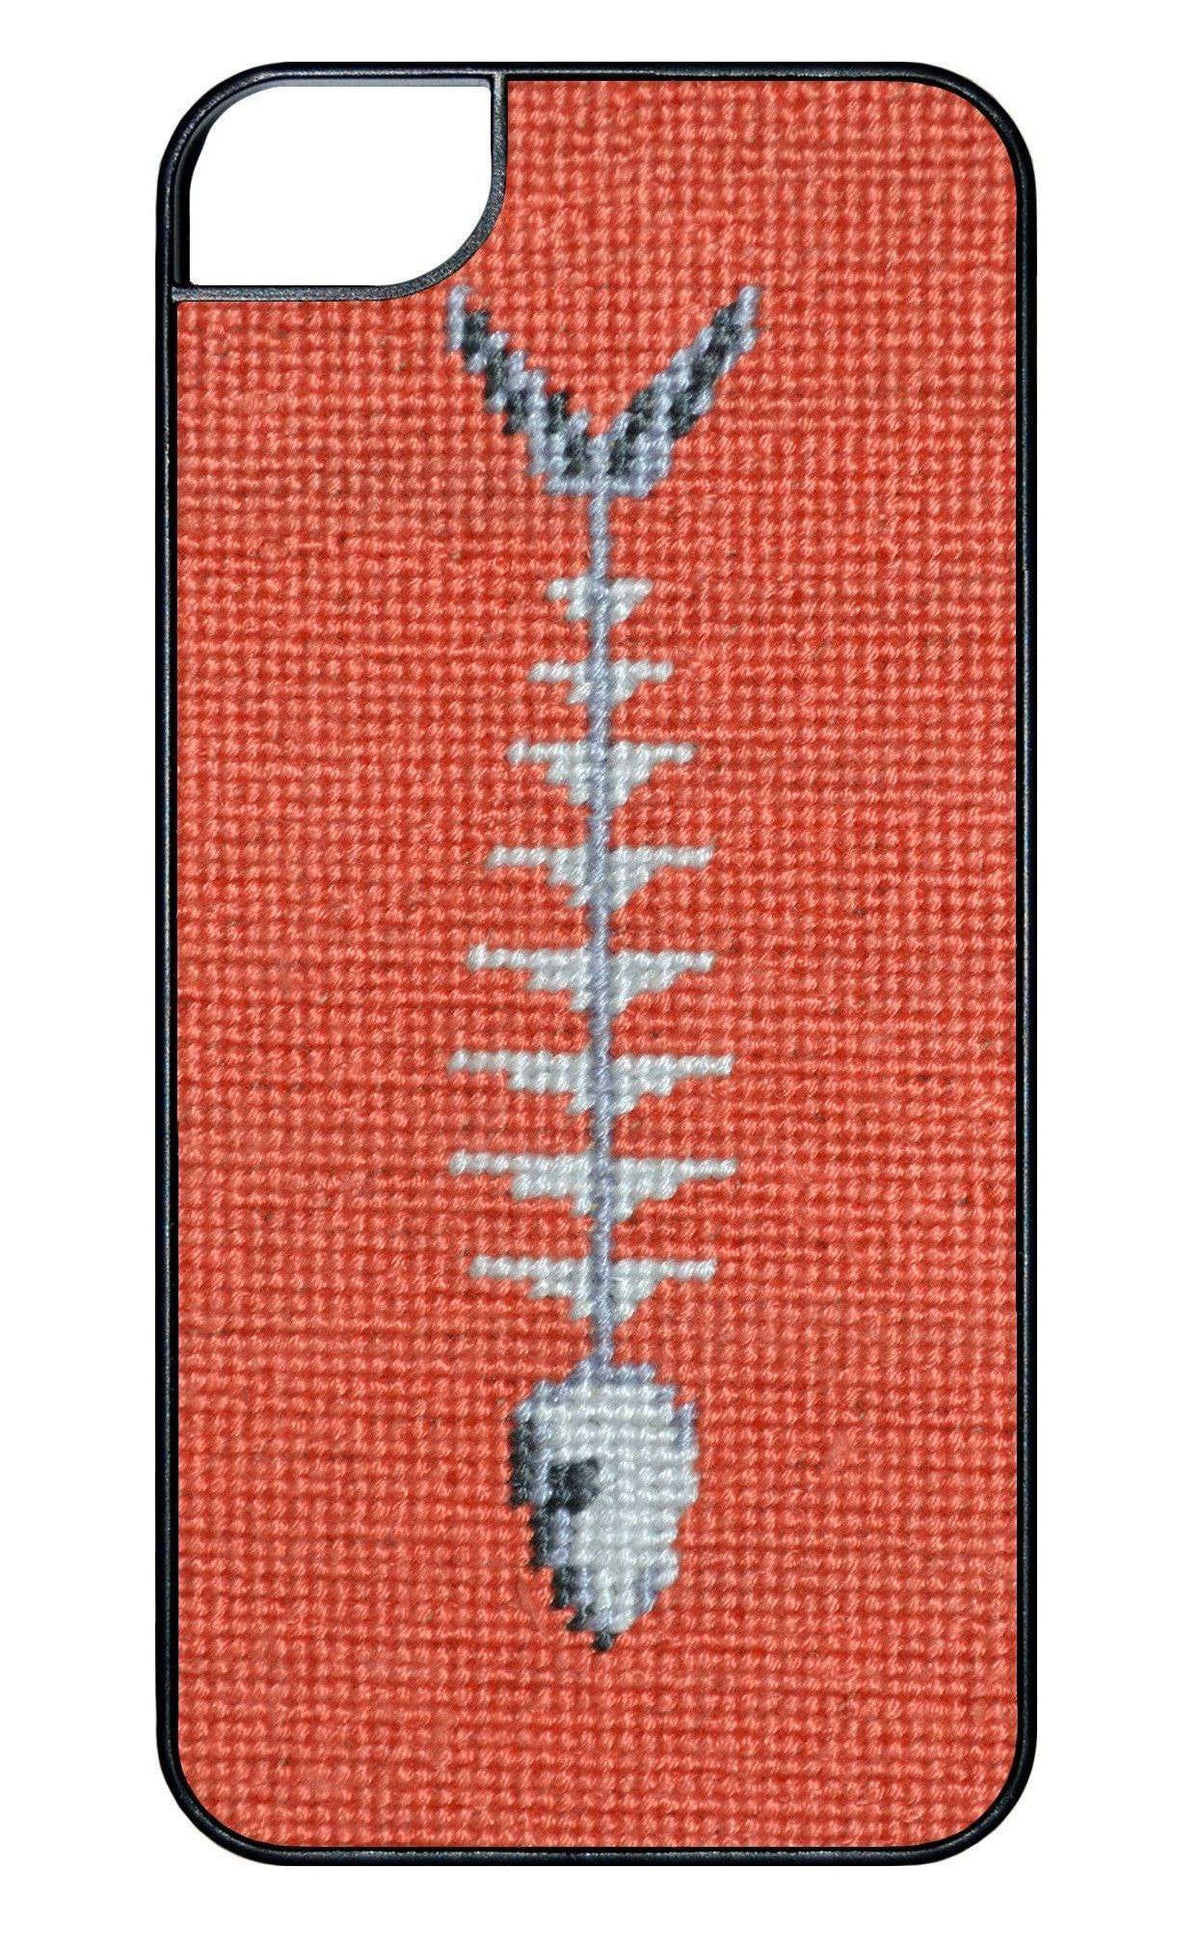 Bonefish Needlepoint iPhone 6 Case by Smathers & Branson - Country Club Prep